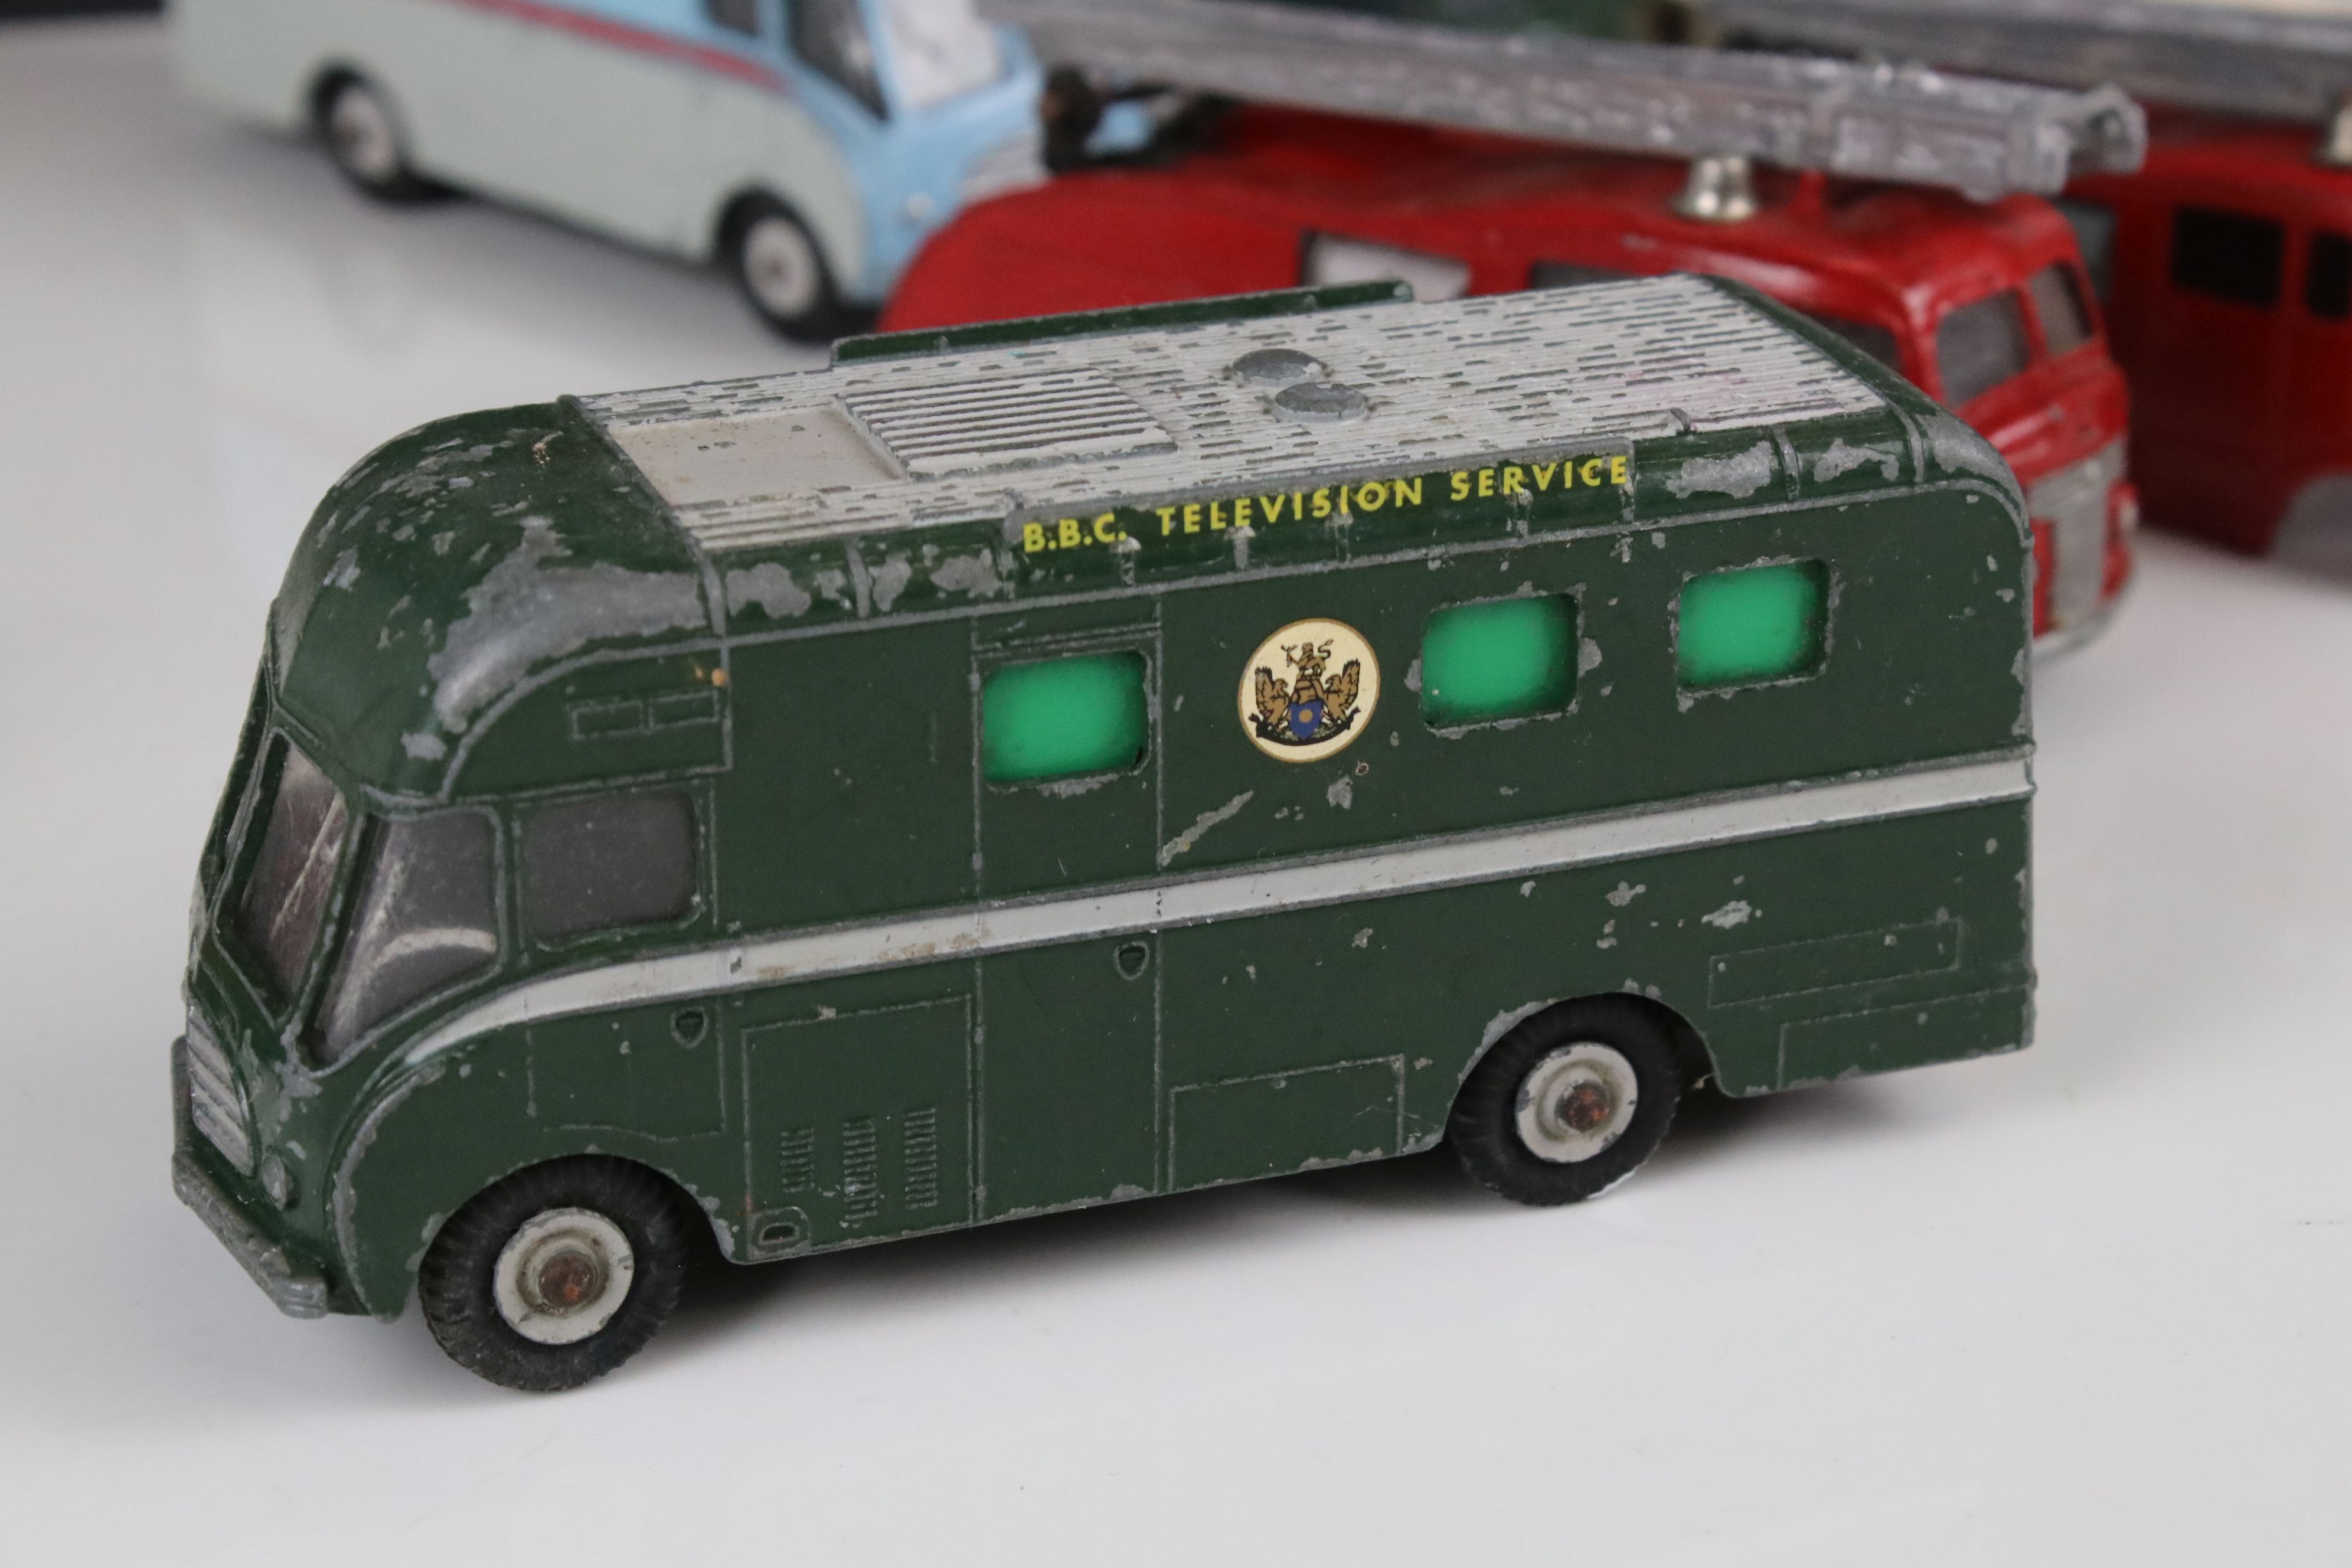 15 play worn mid 20th diecast models to include TV Mobile Control Room, 967 BBC TV Mobile Control - Image 9 of 15